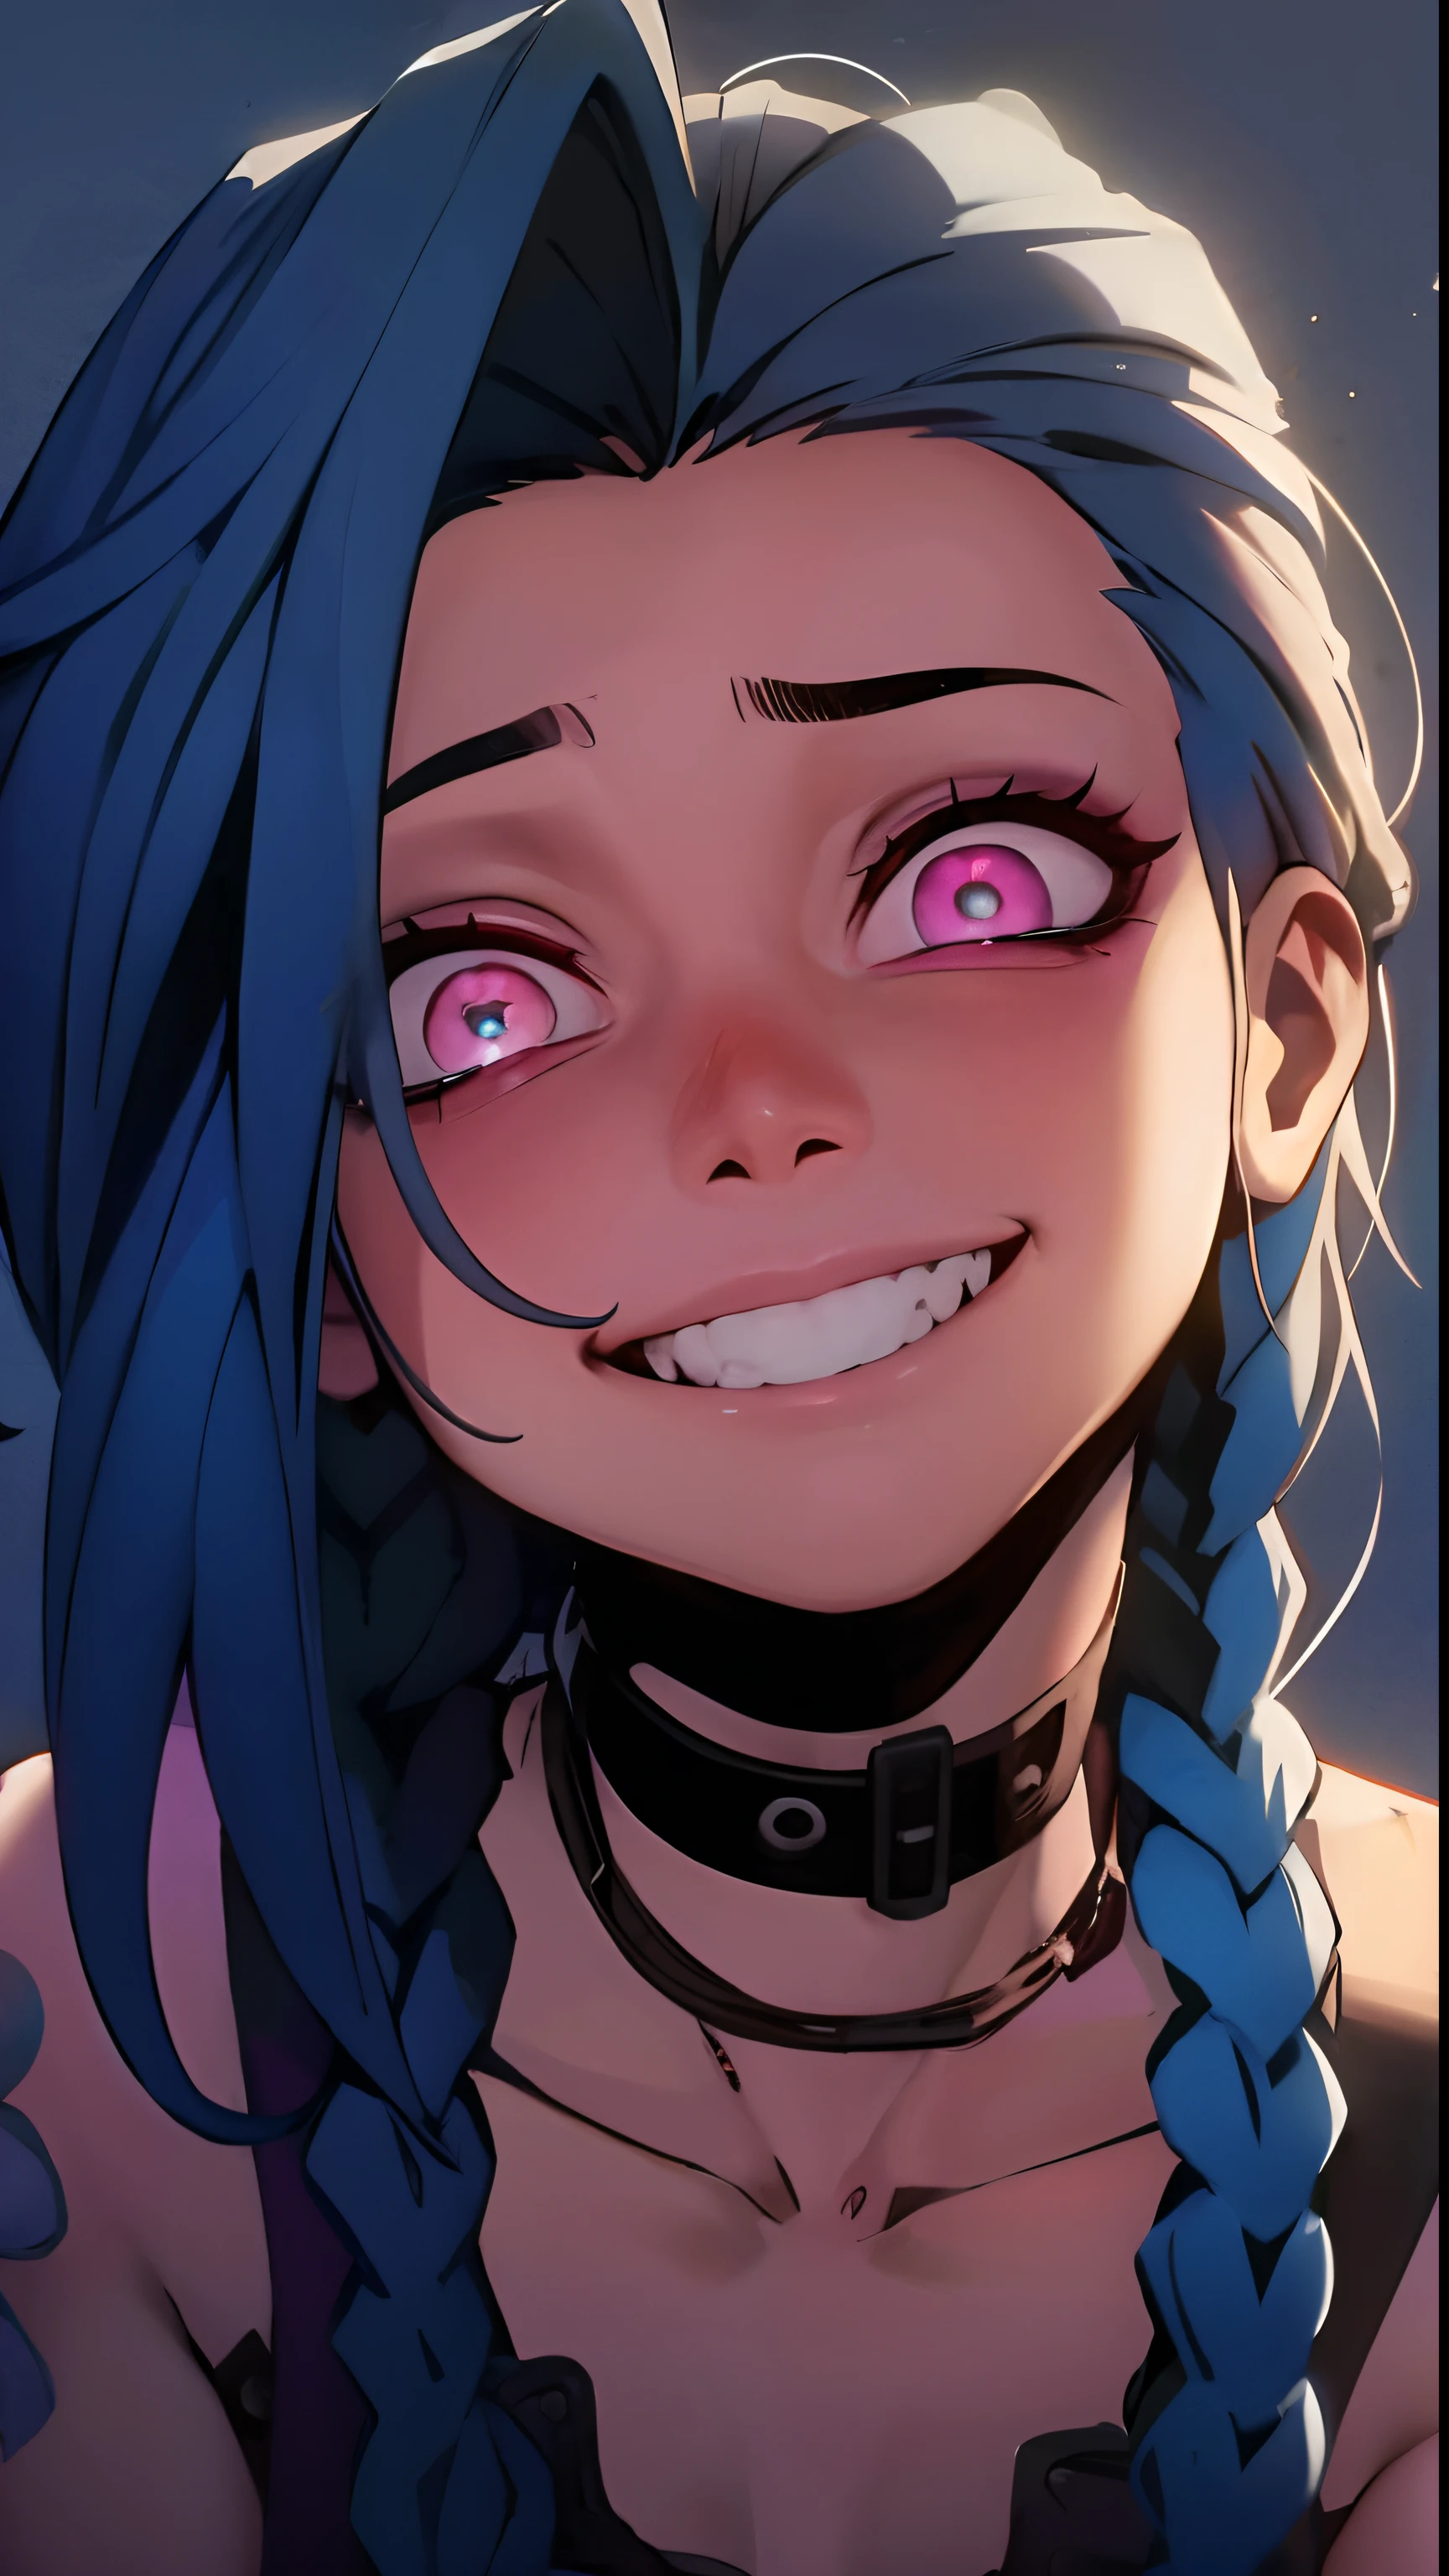 a close up of a person with blue hair and pink eyes, jinx face, jinx expression, portrait of jinx from arcane, Jinx de League of Legends, Jinx, Arcanum, with glowing eyes, evil smile and glowing eyes,  anime with hammer hair, jinx arcane, face ahegao, 2 d anime style, glowing eyes everywhere, marvelous expression